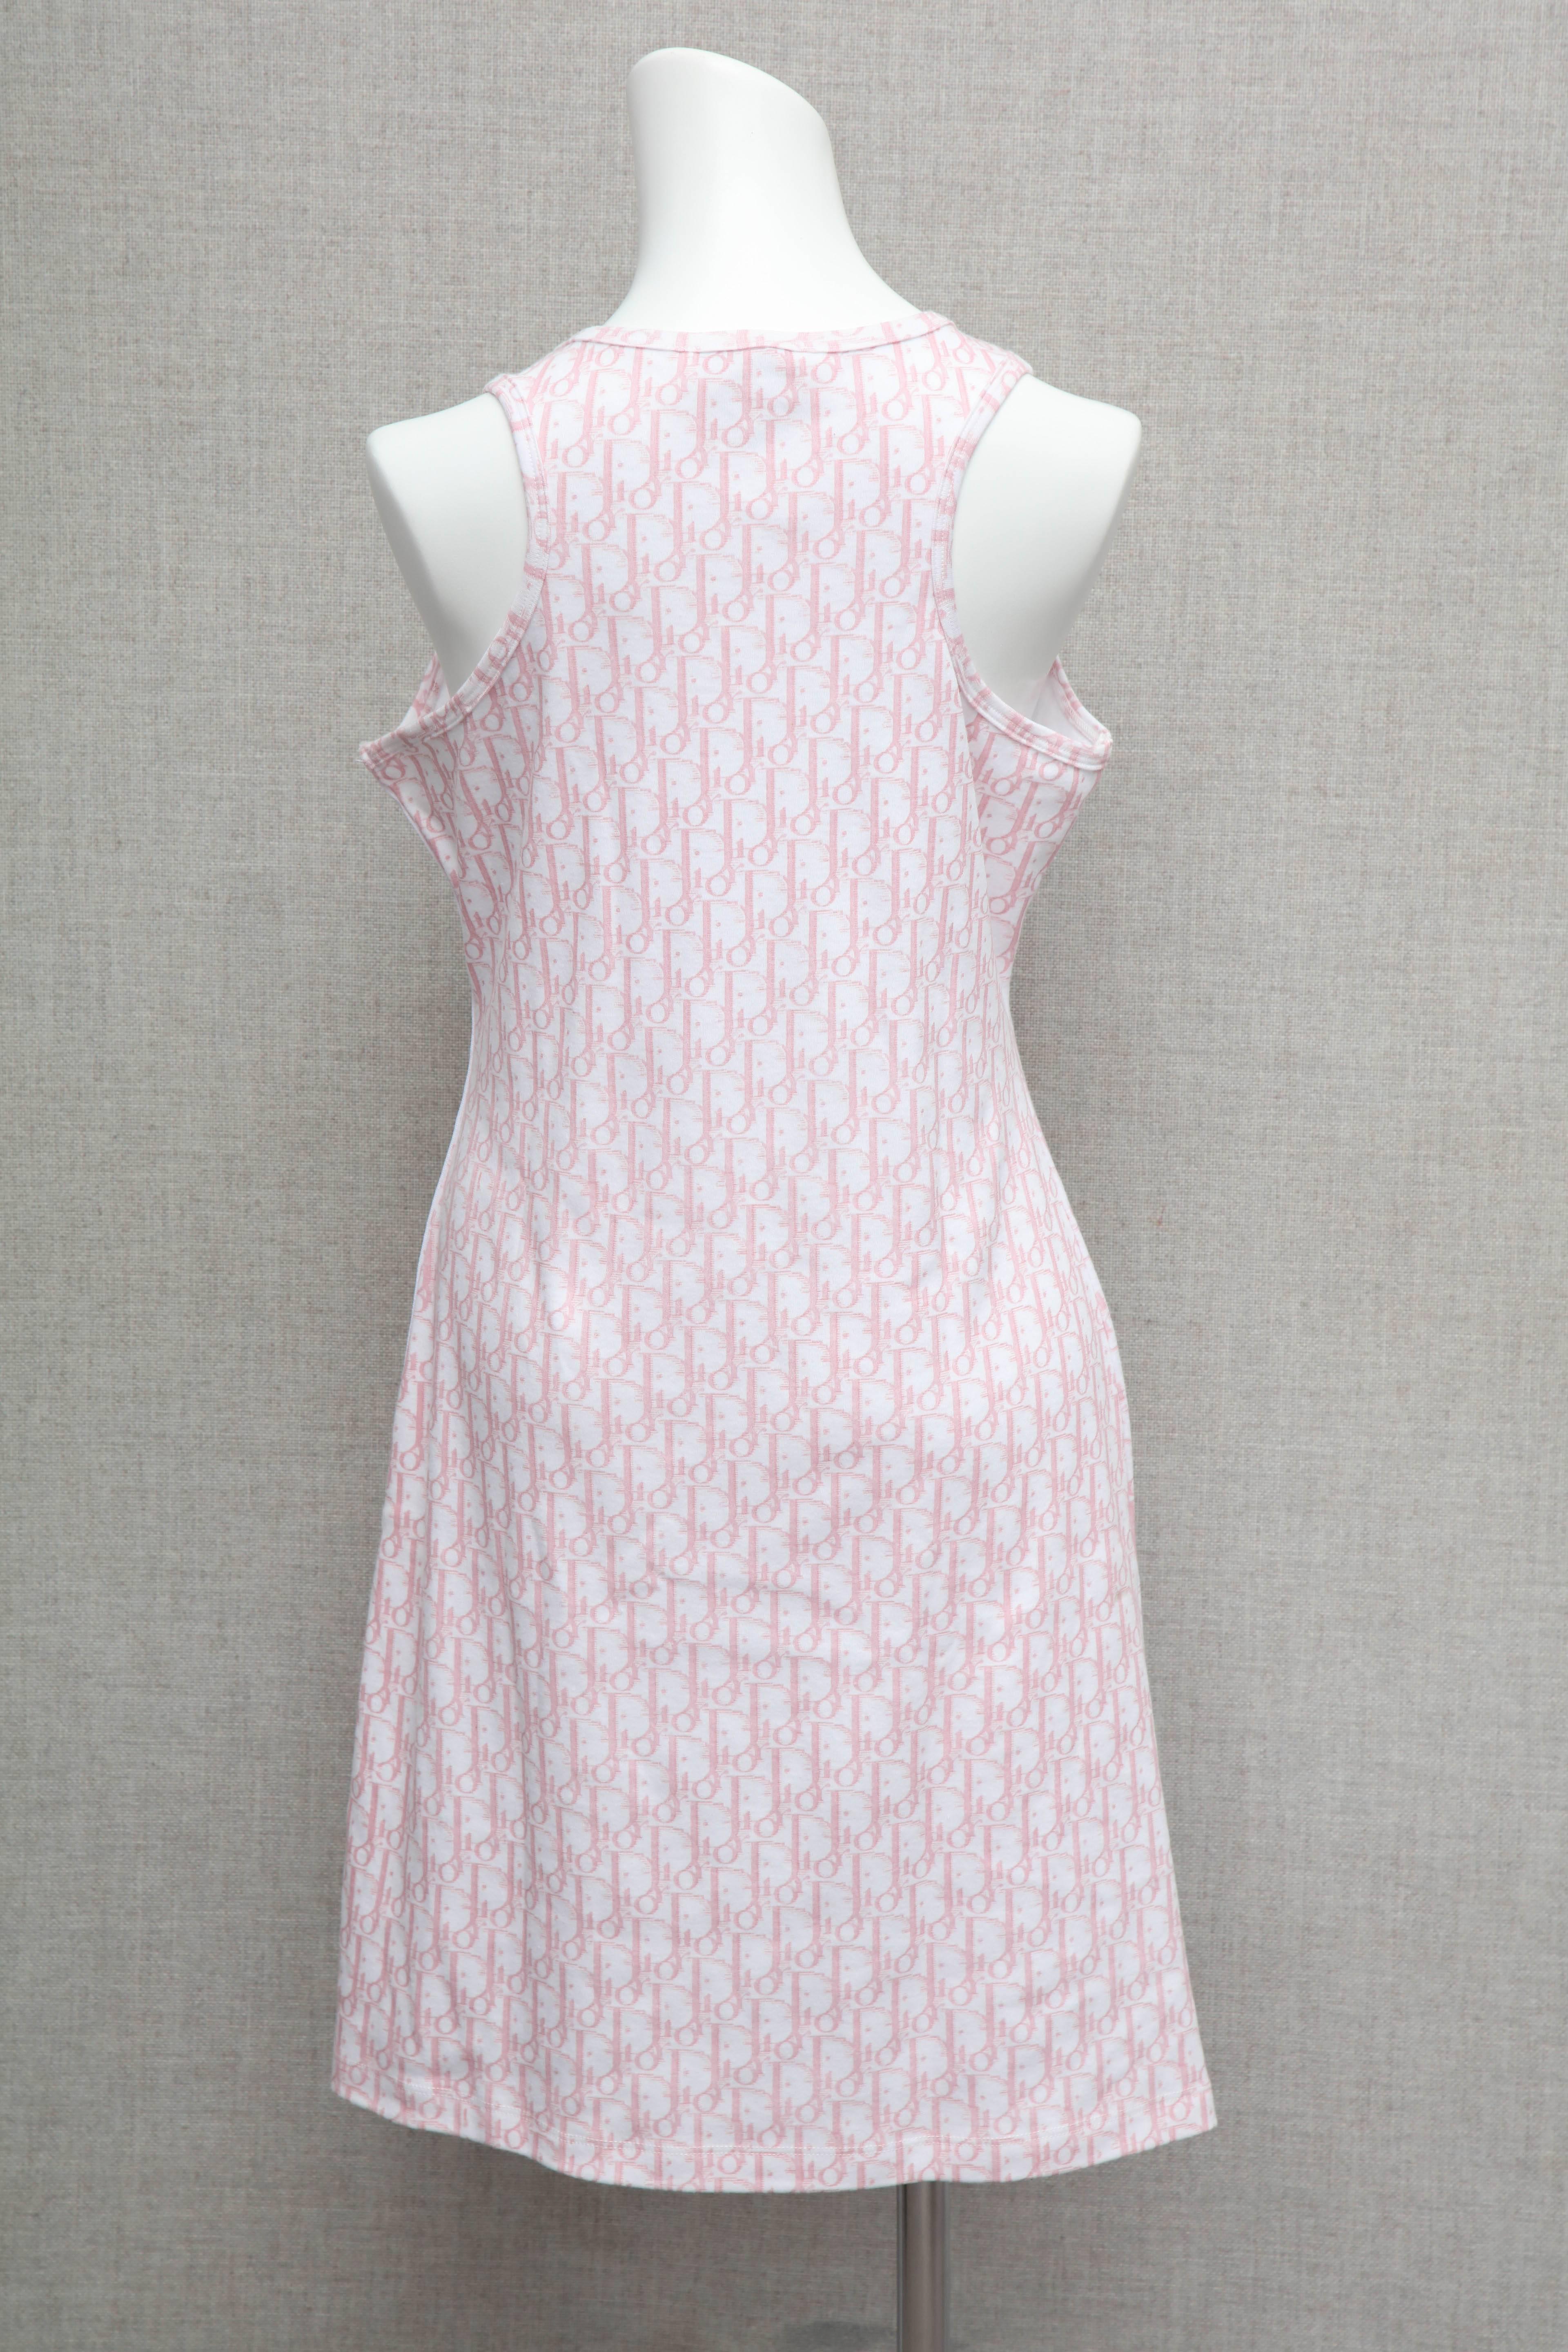 John Galliano for Christian Dior Trotter Logo Pink Dress For Sale 1